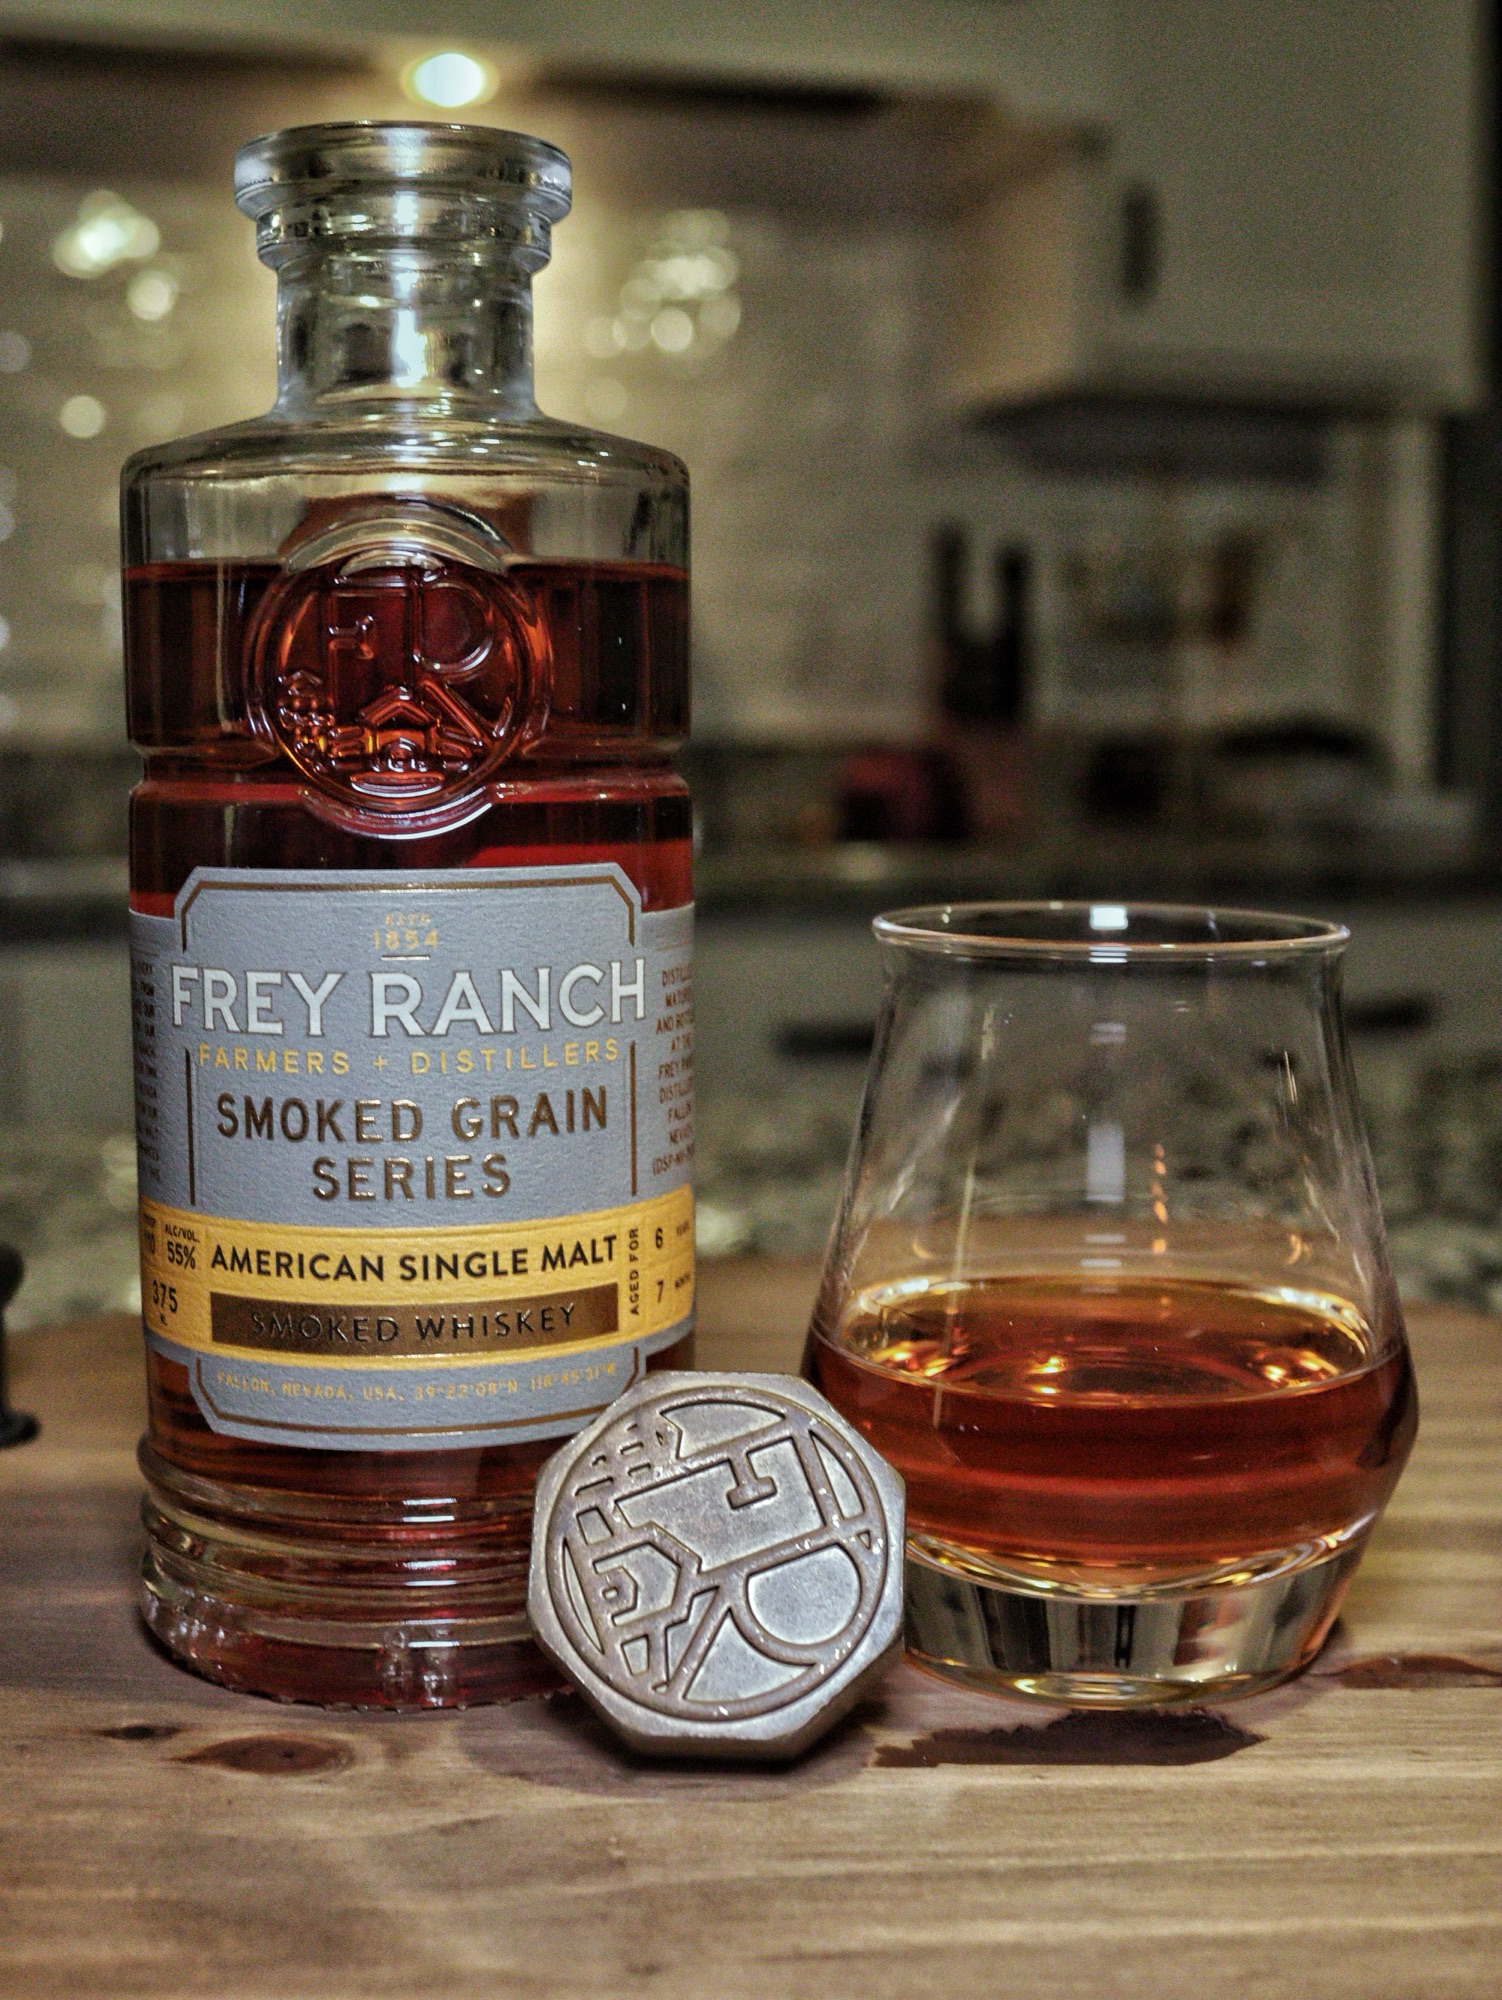 Tasting & Reviewing The New Frey Ranch Smoked American Single Malt